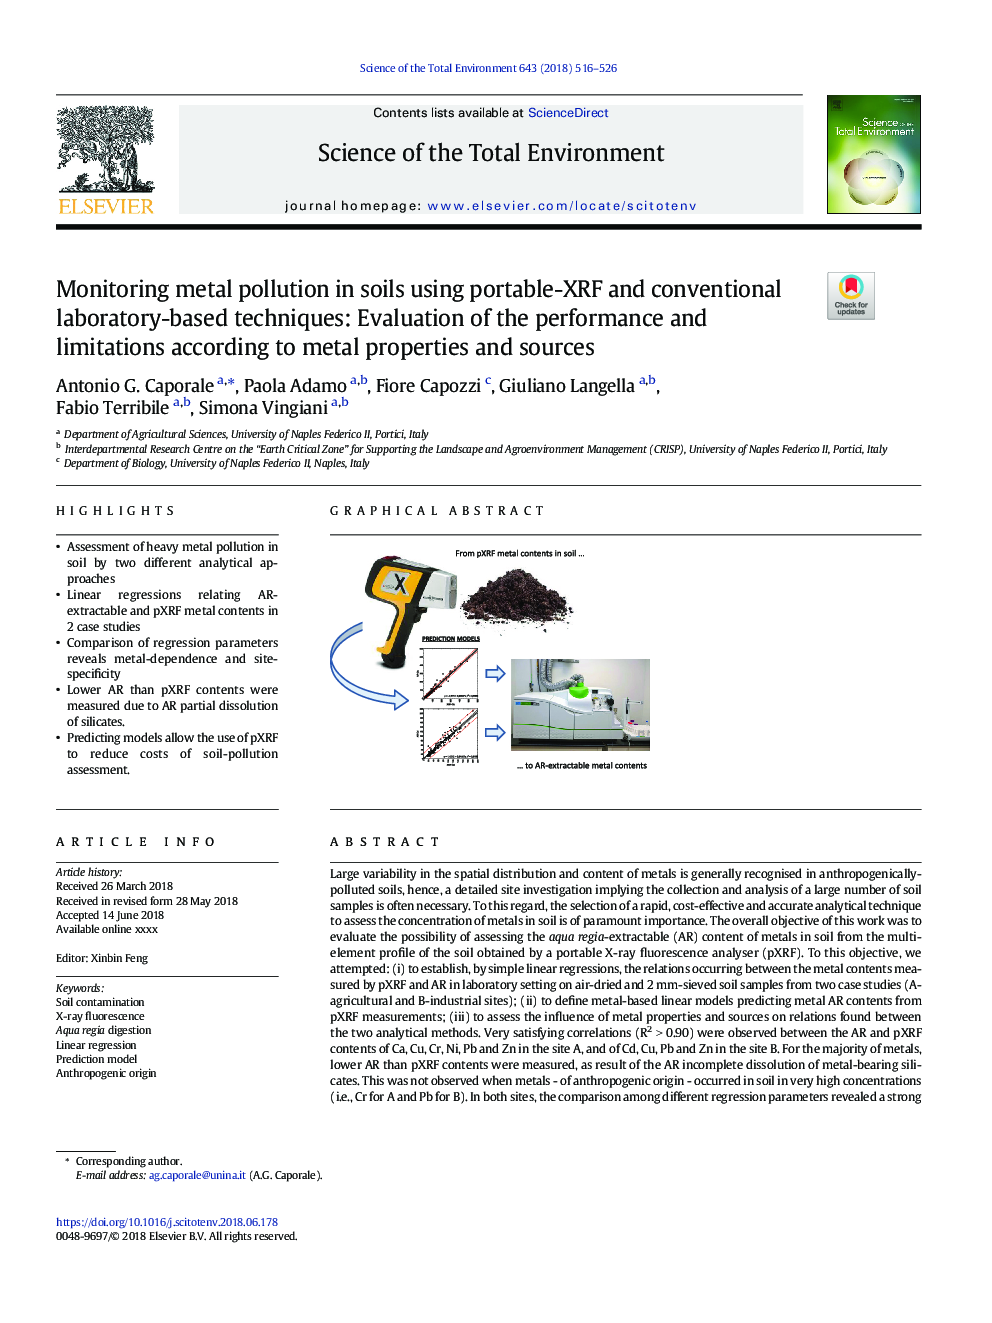 Monitoring metal pollution in soils using portable-XRF and conventional laboratory-based techniques: Evaluation of the performance and limitations according to metal properties and sources